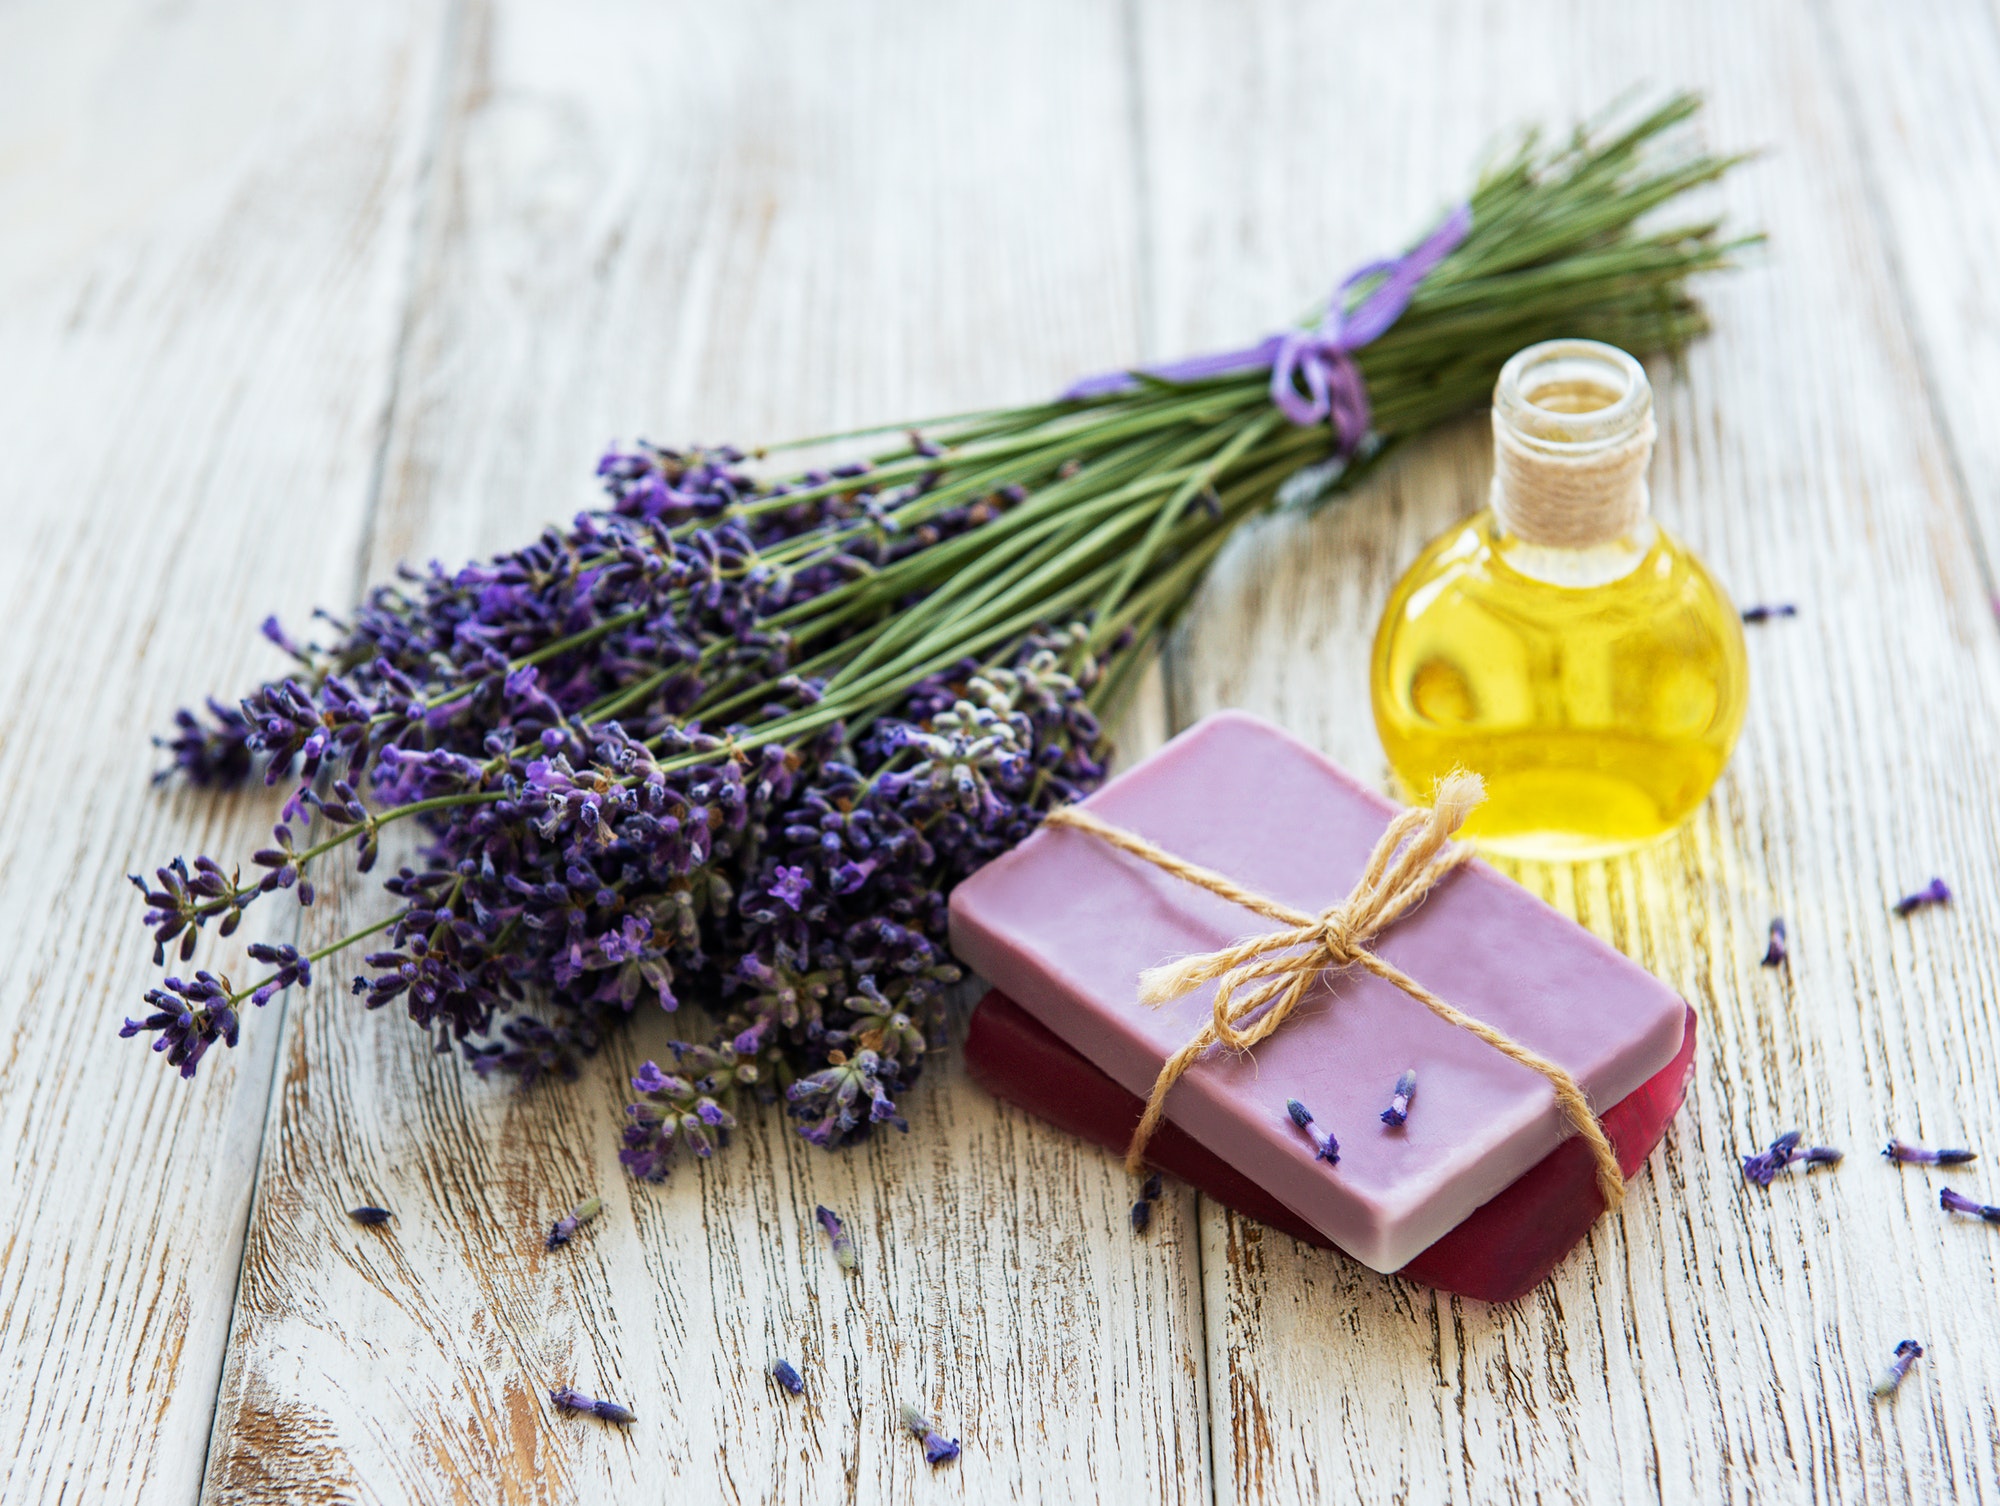 lavender flowers and lavender aromatic oils